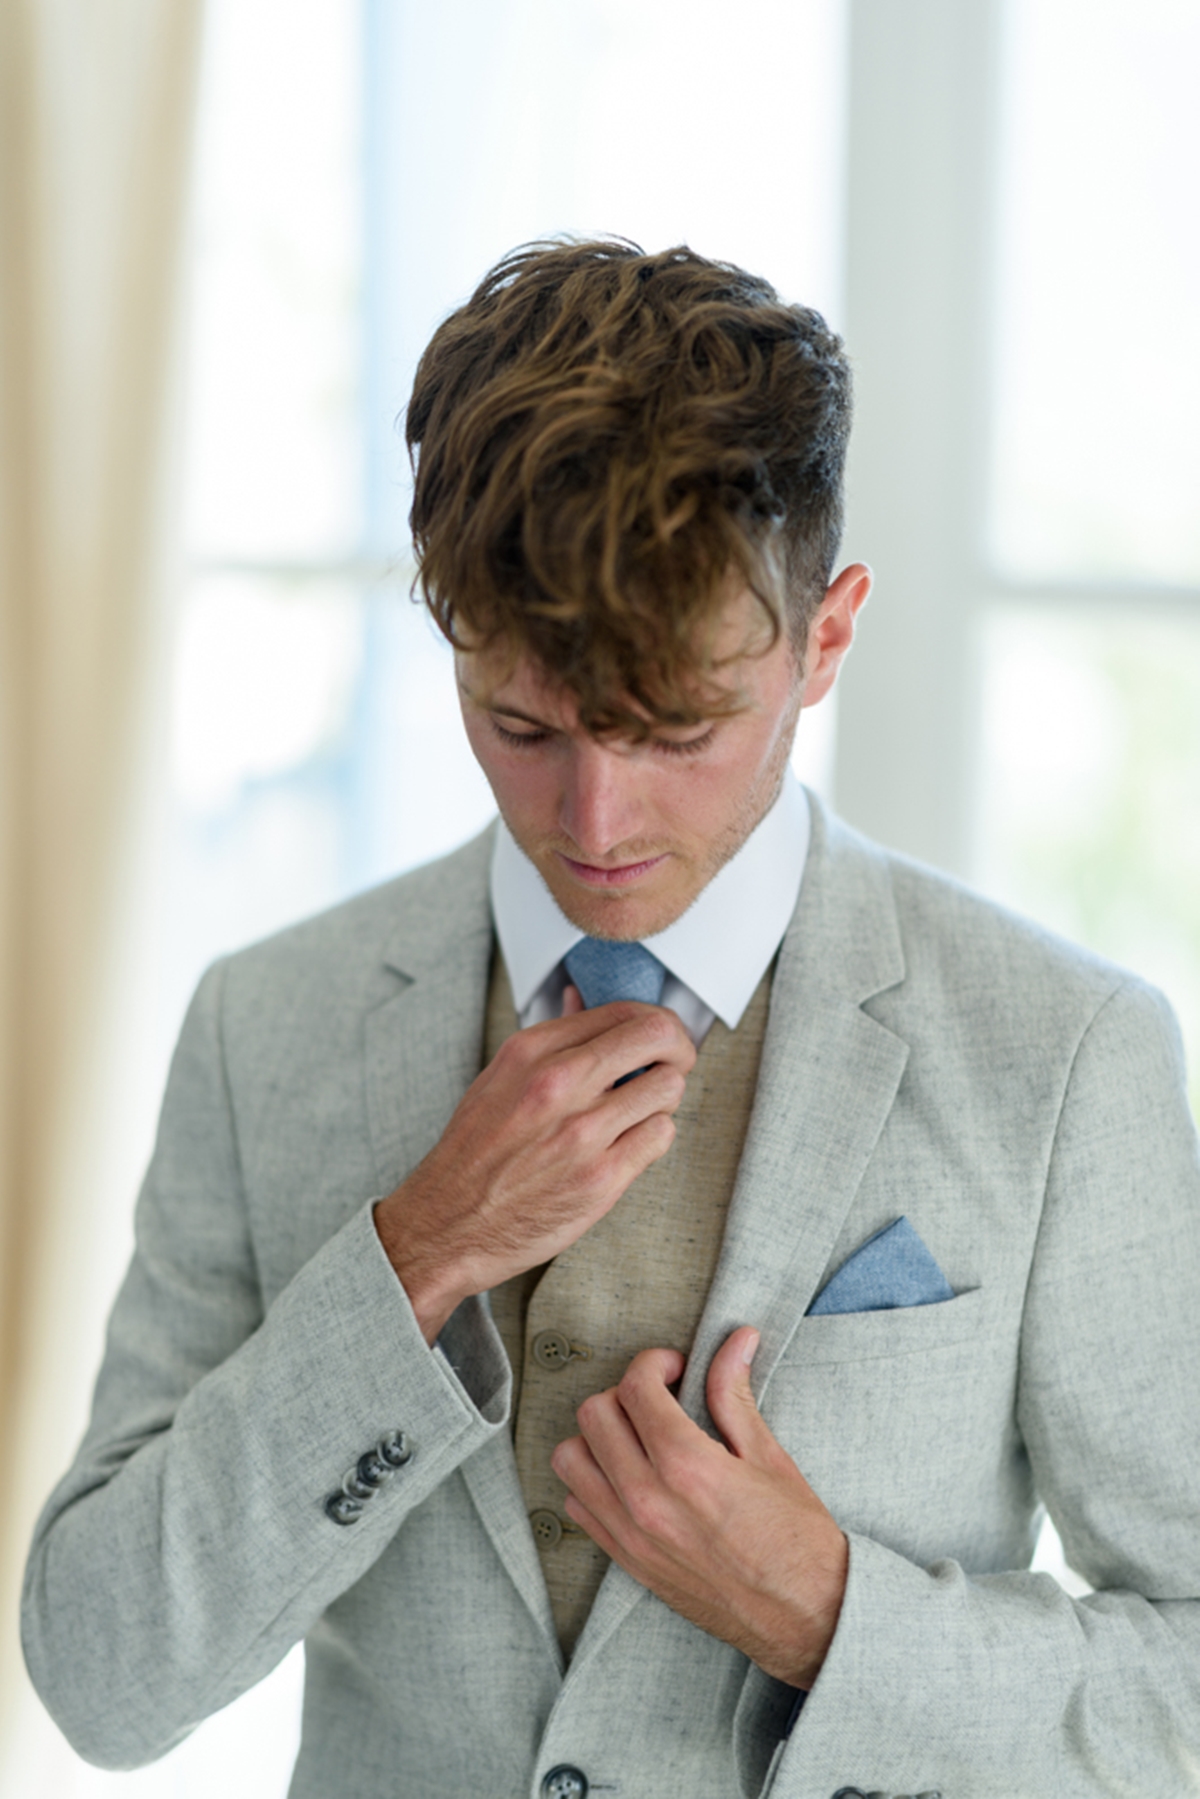 Ideas for groom's suit for a summer wedding